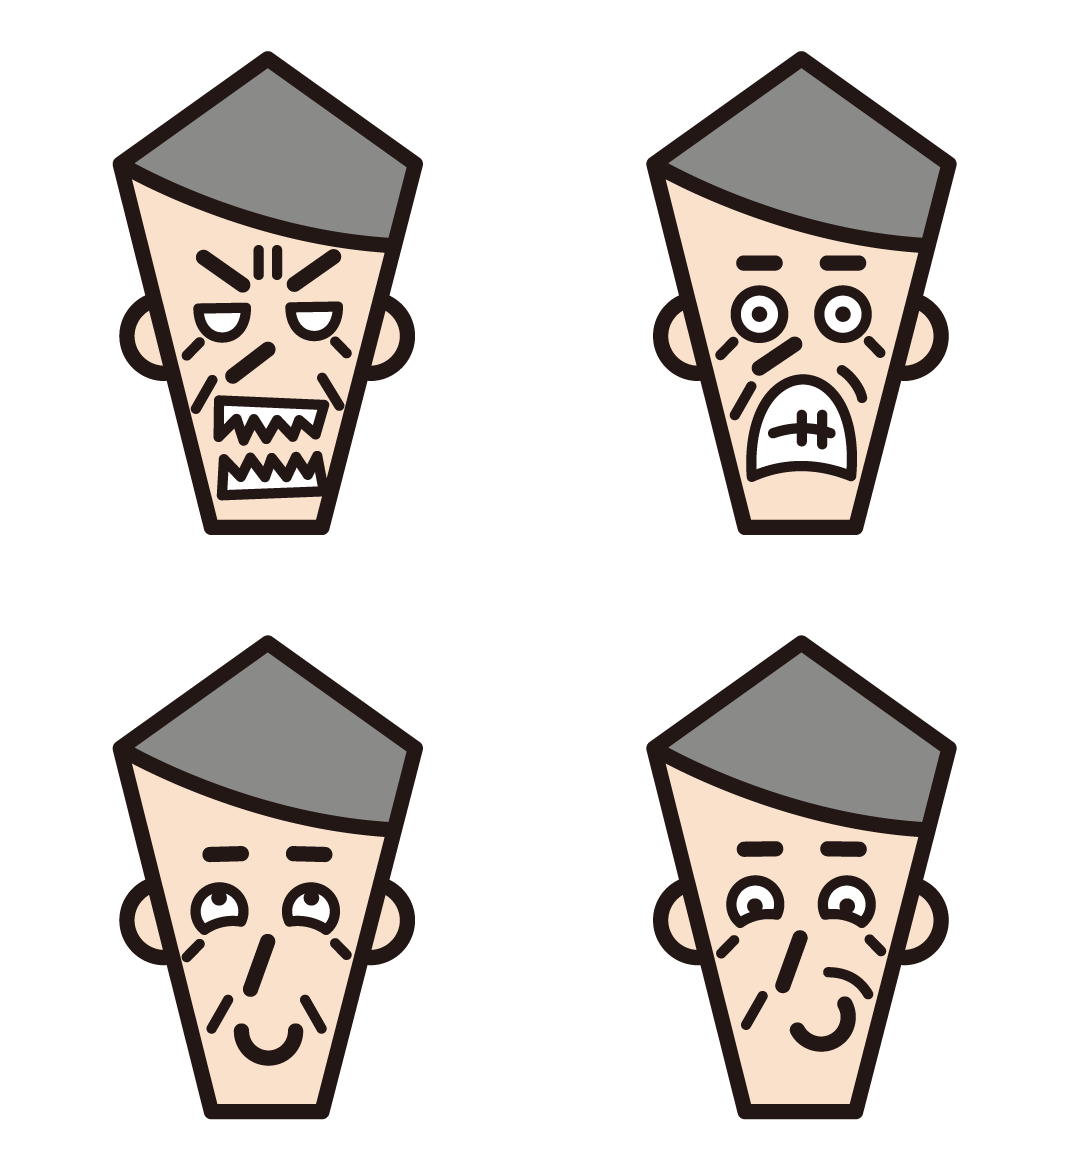 3 illustrations of the various expressions of the old man